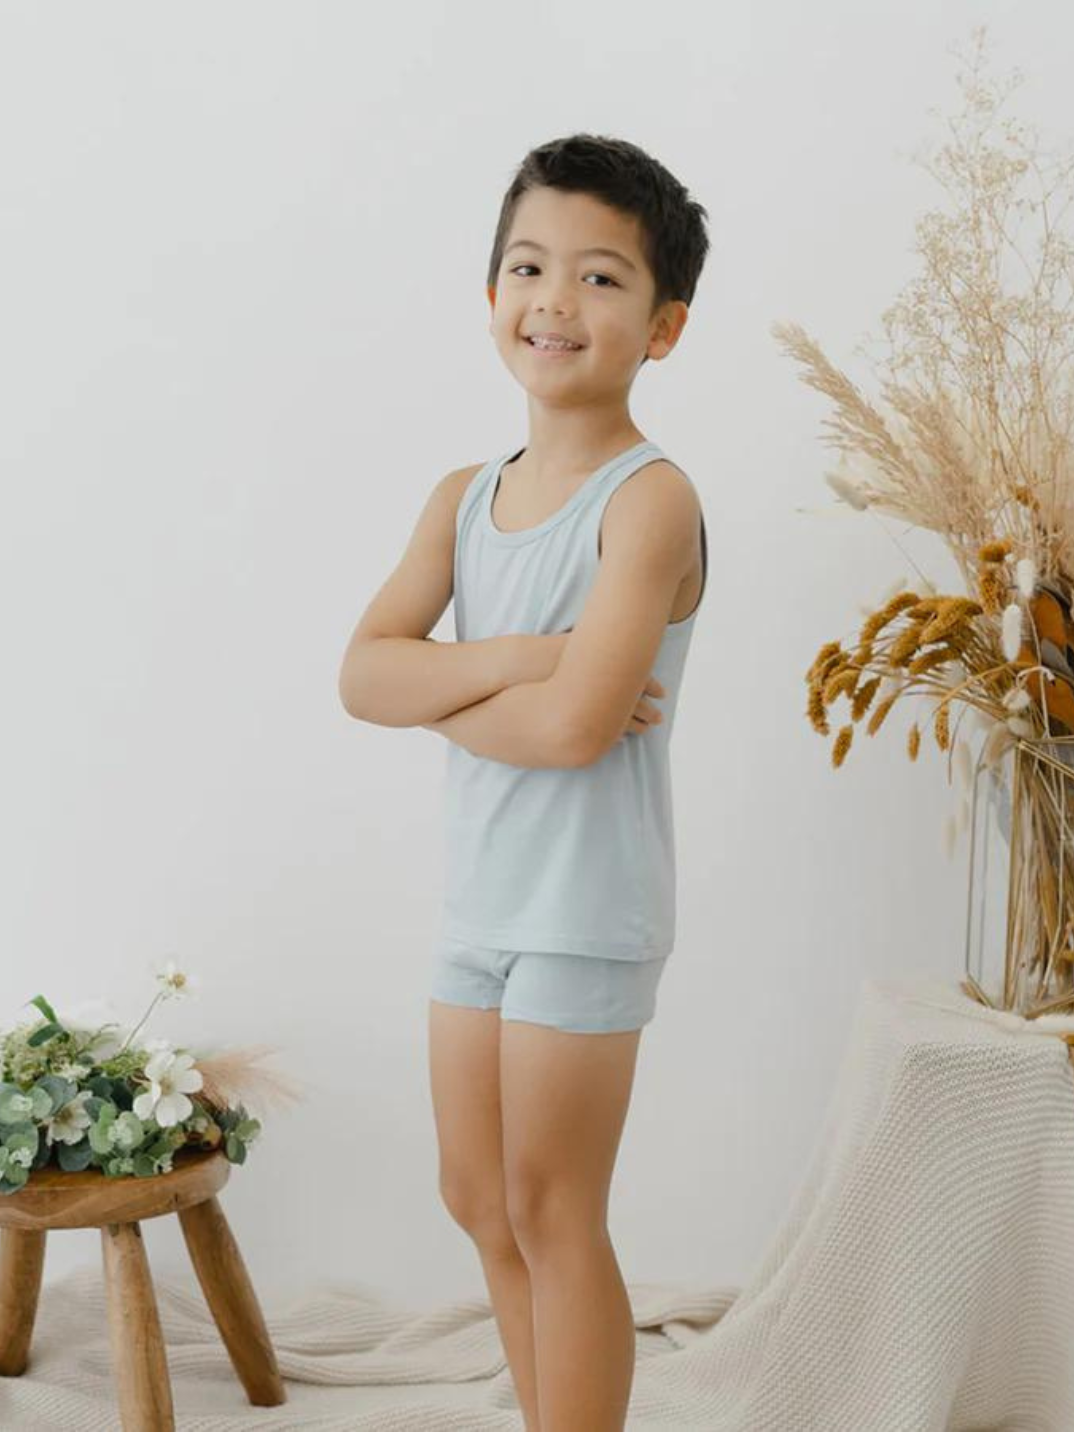 These tank tops are super soft and gentle on your little ones' skin. Designed with a loose, unisex fit for play, movement and a comfy night's rest. Wear the breathable layer under garments for day or snooze in the ultimate comfort. Made with modal interwoven with eco-soft technology. Comes with: 2x blue tank tops.